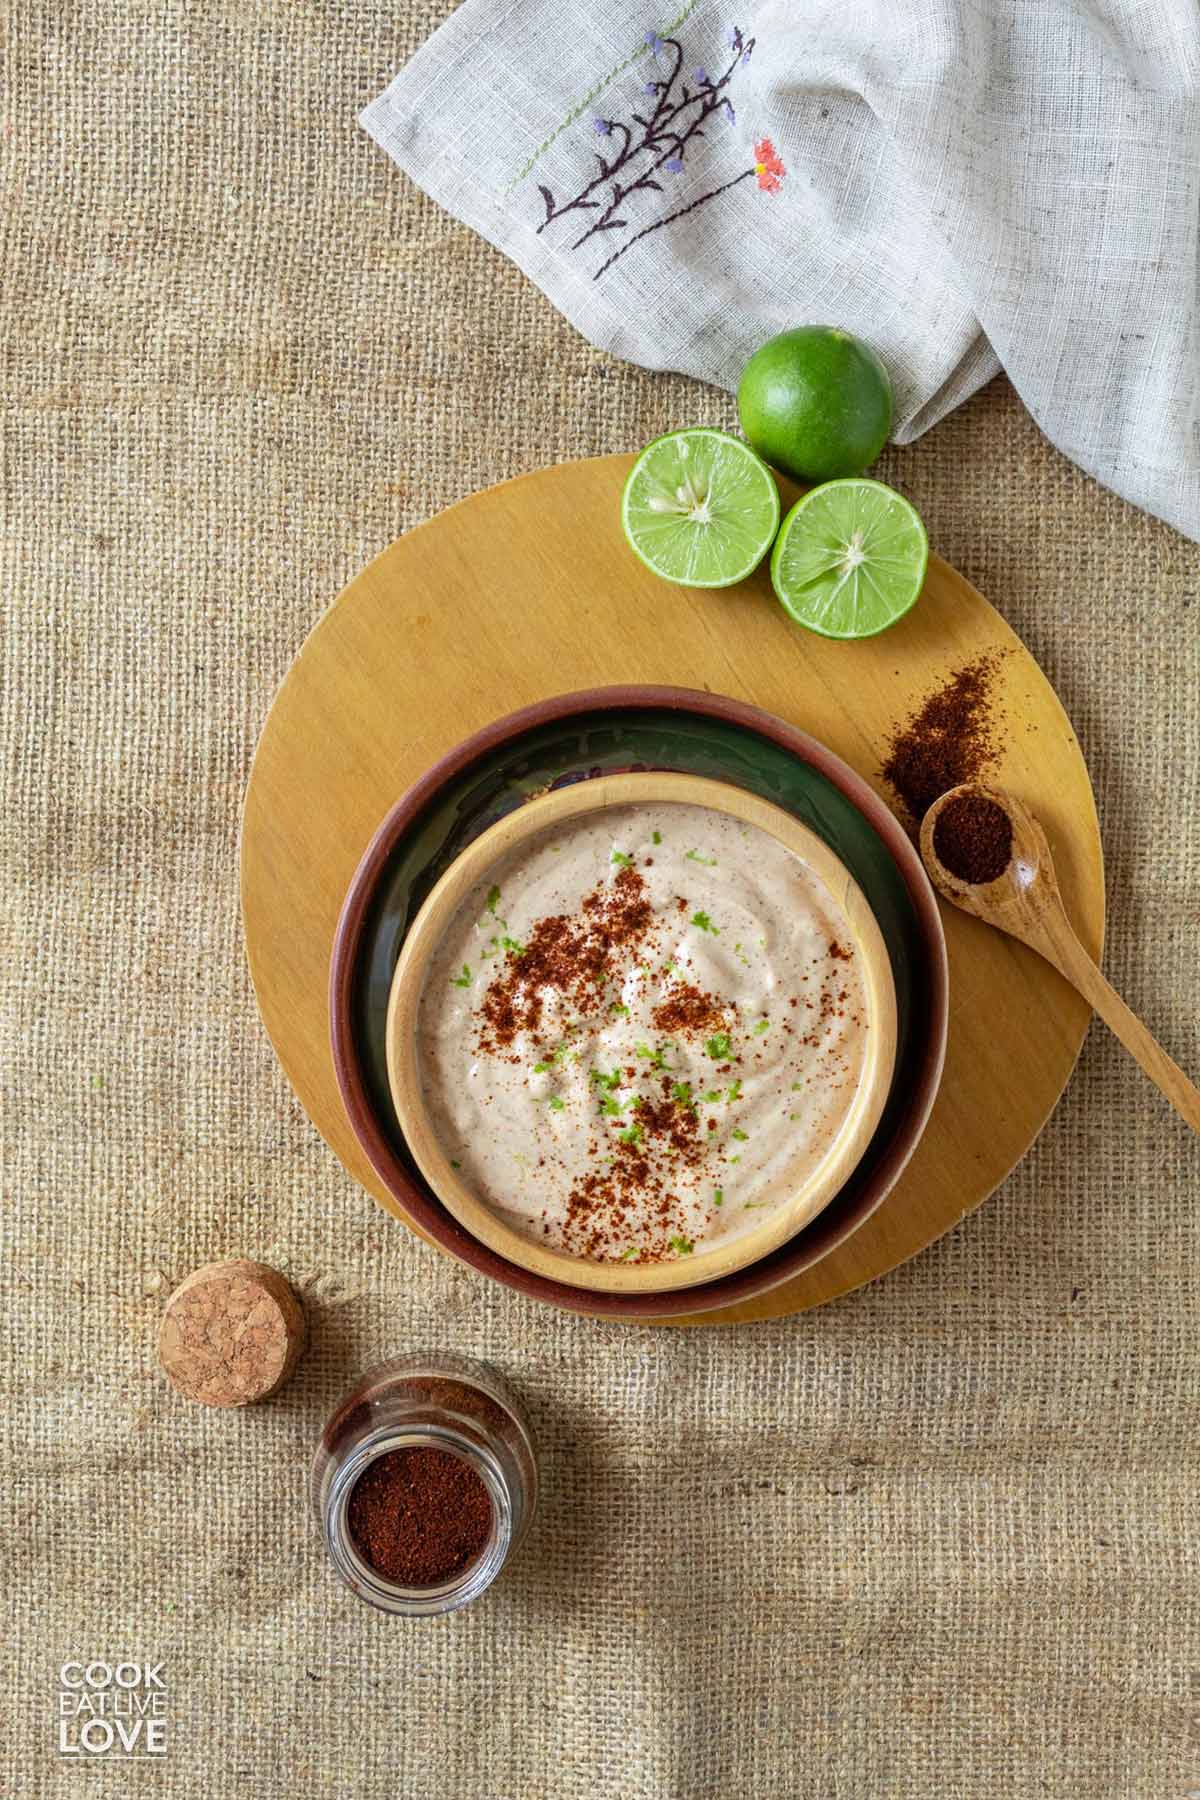 Chipotle yogurt sauce in a bowl on a plate with limes and a spoonful of chipotle chili powder.